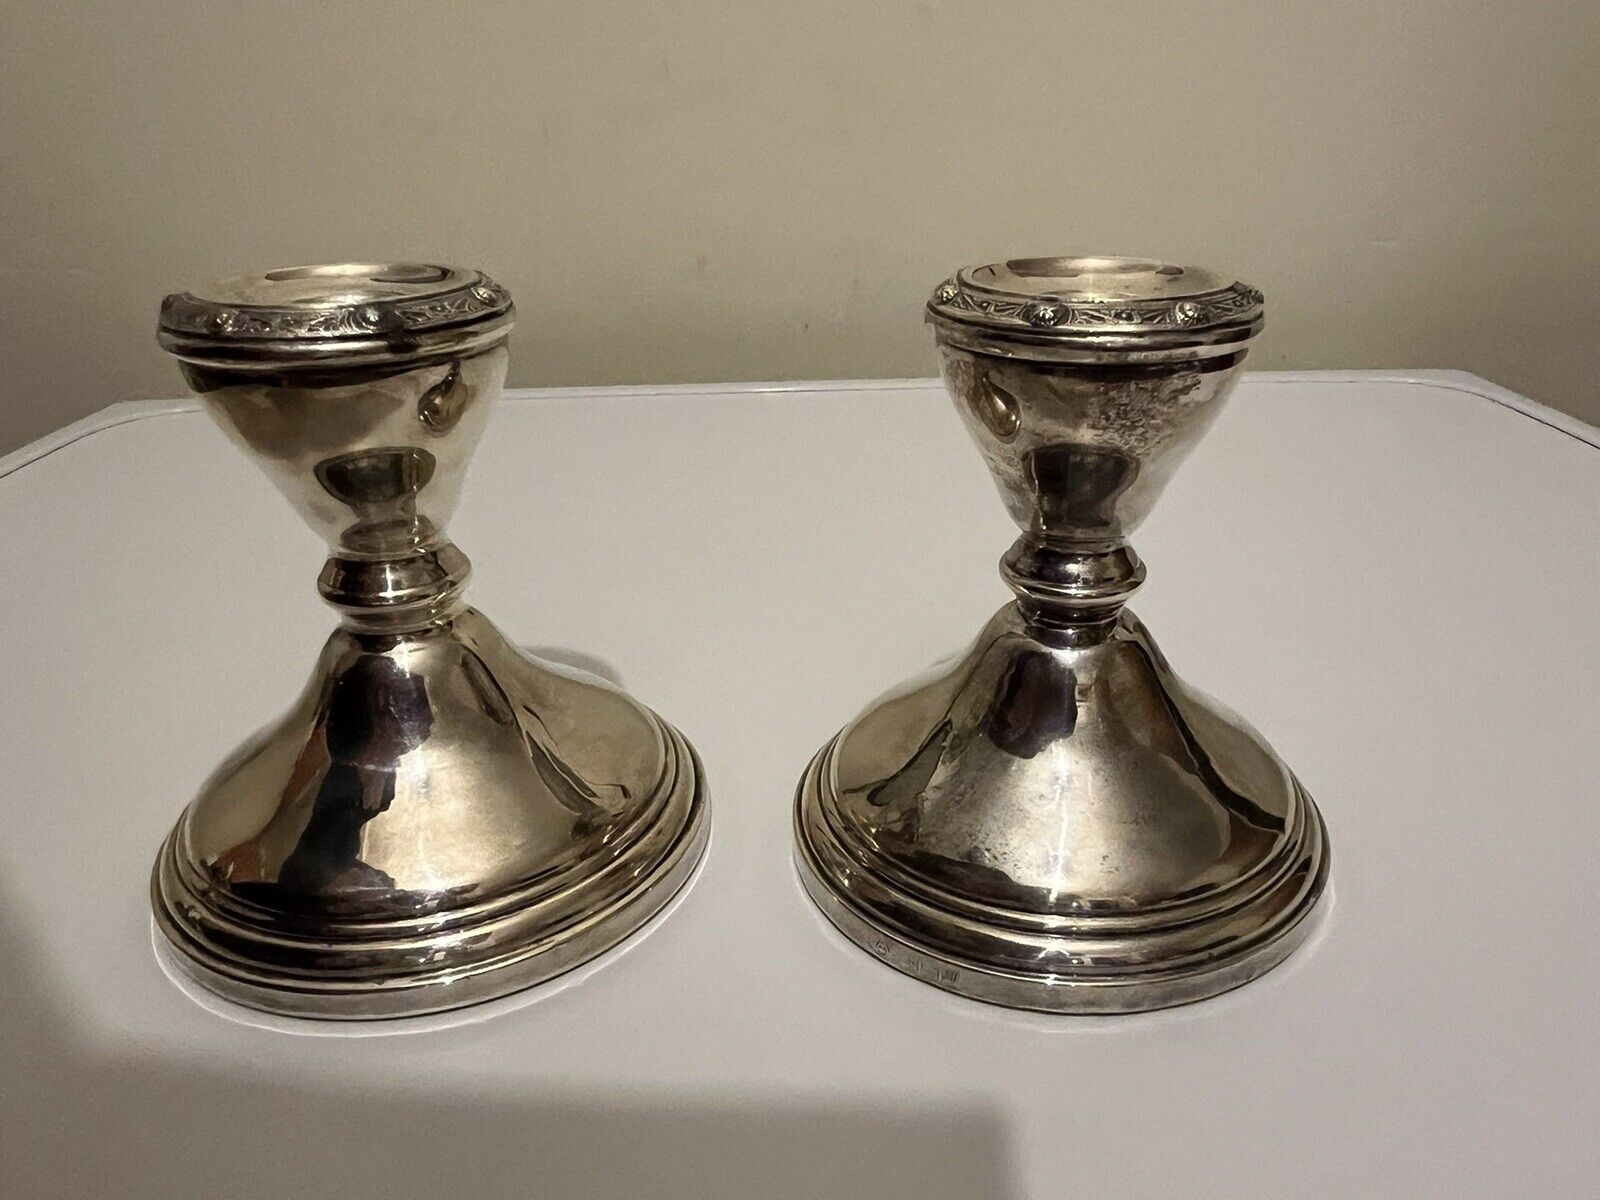 LARGE Dwarf Solid Silver Candlesticks Wide Base Hallmarks 665.5g Adie Brothers